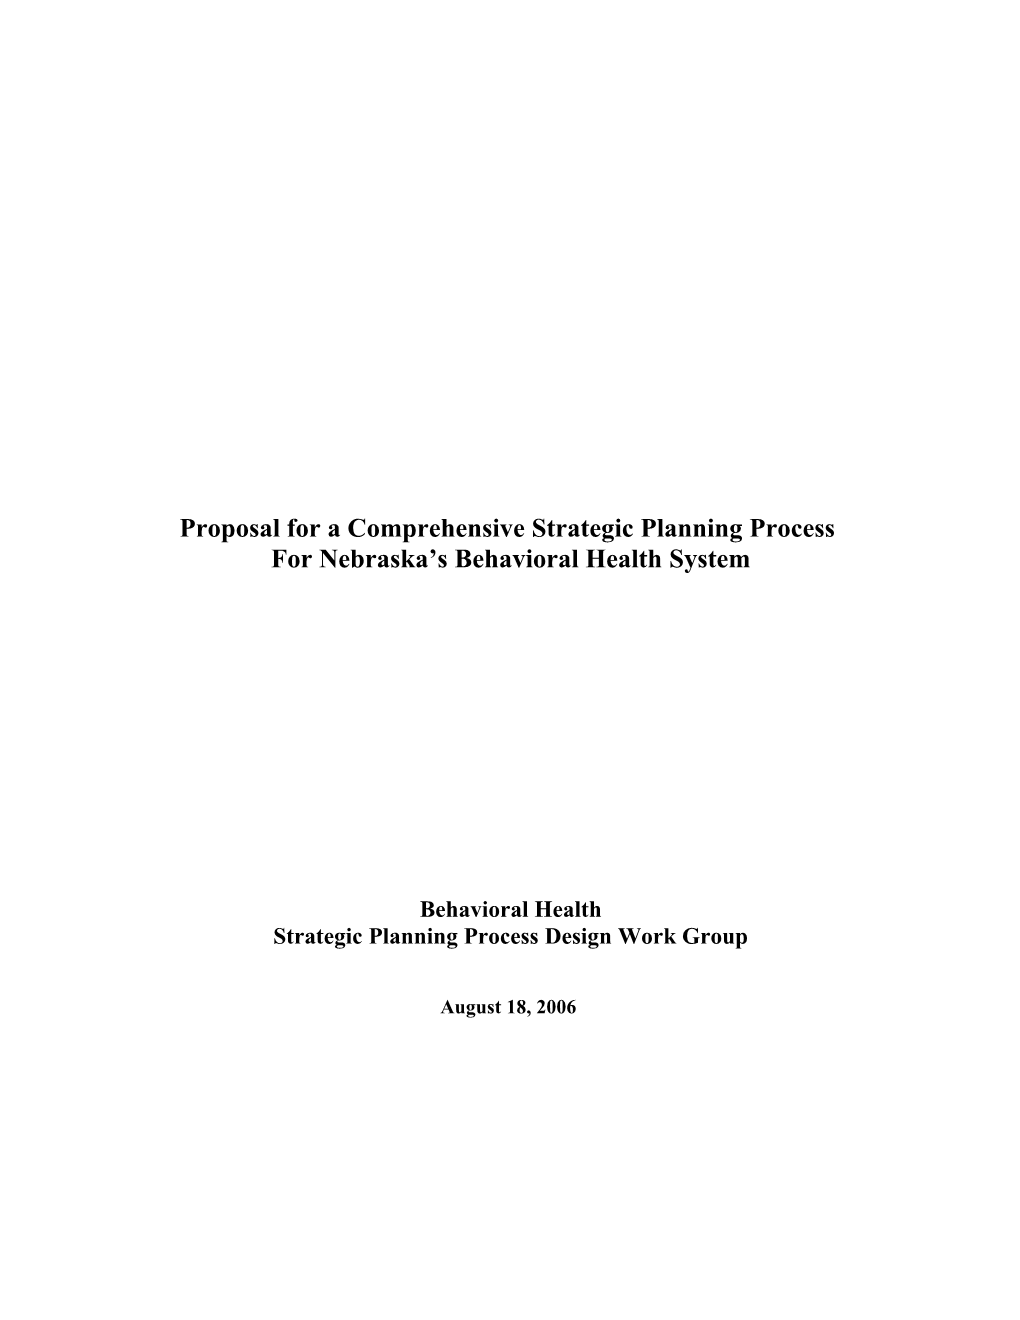 Proposal for a Comprehensive Strategic Planning Process